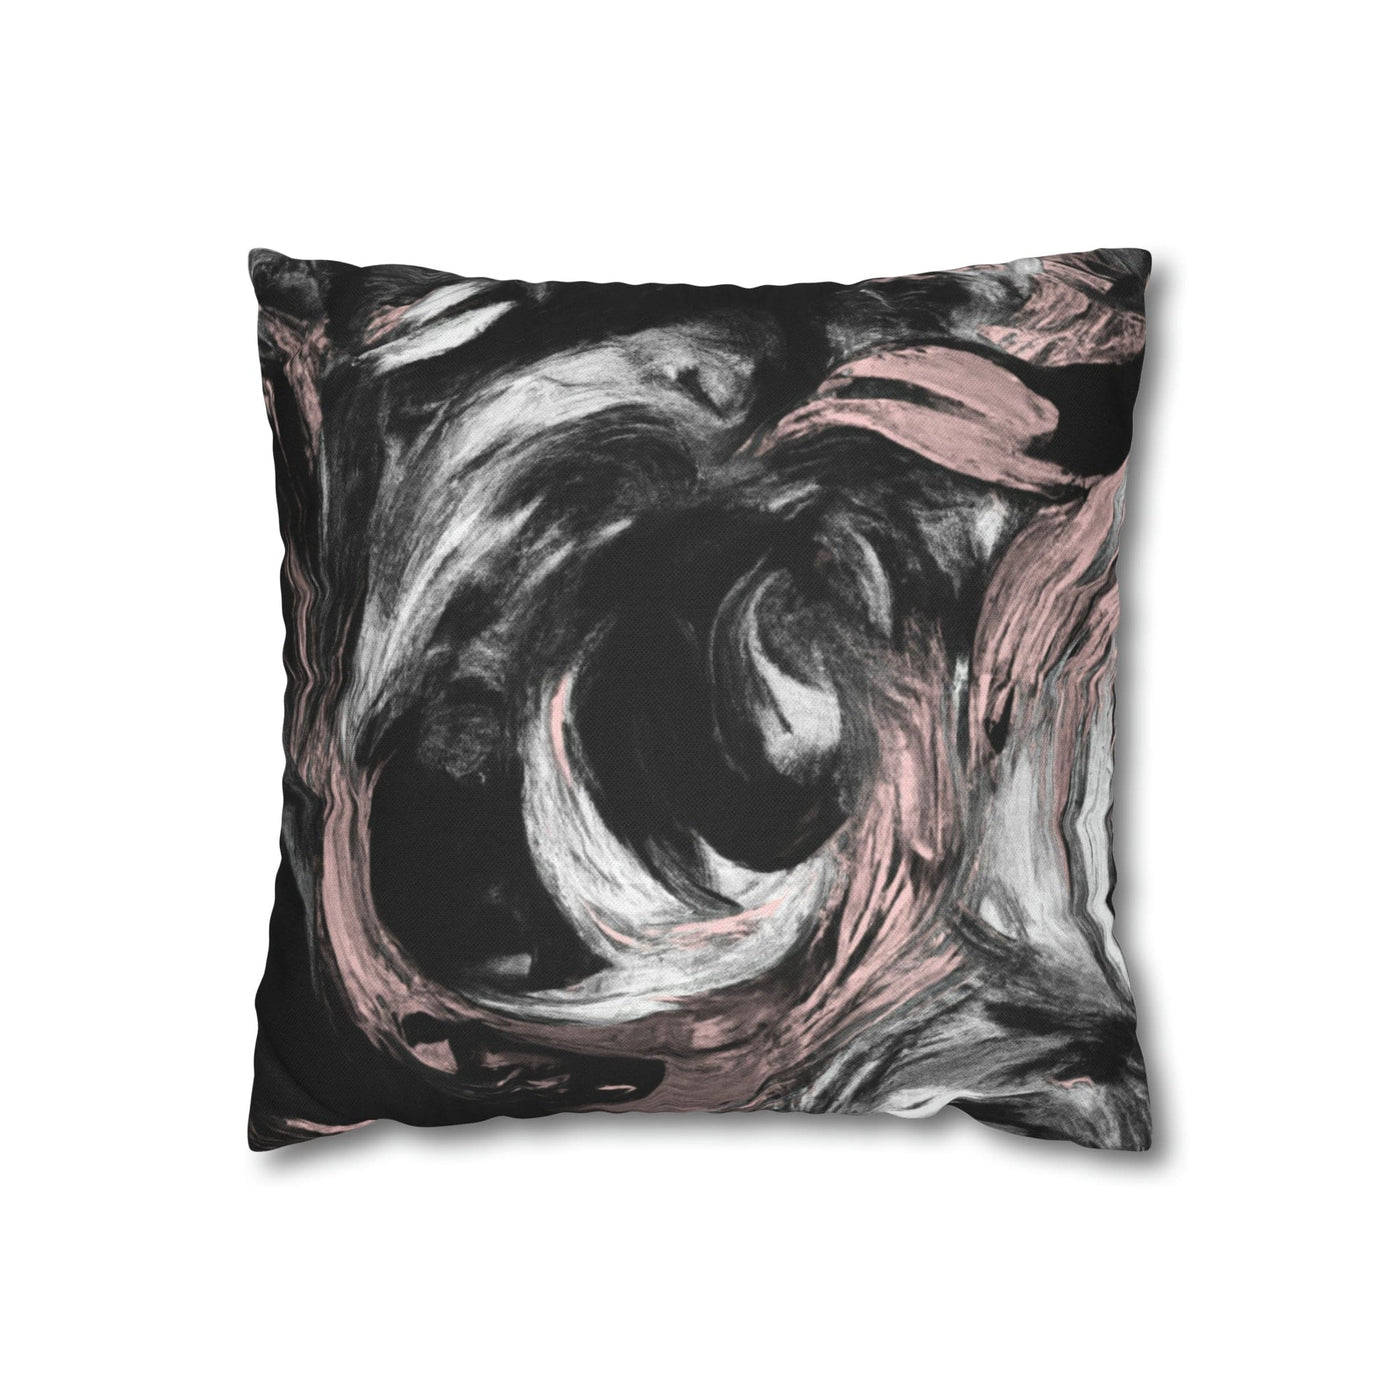 Decorative Throw Pillow Covers With Zipper - Set Of 2 Black Pink White Abstract